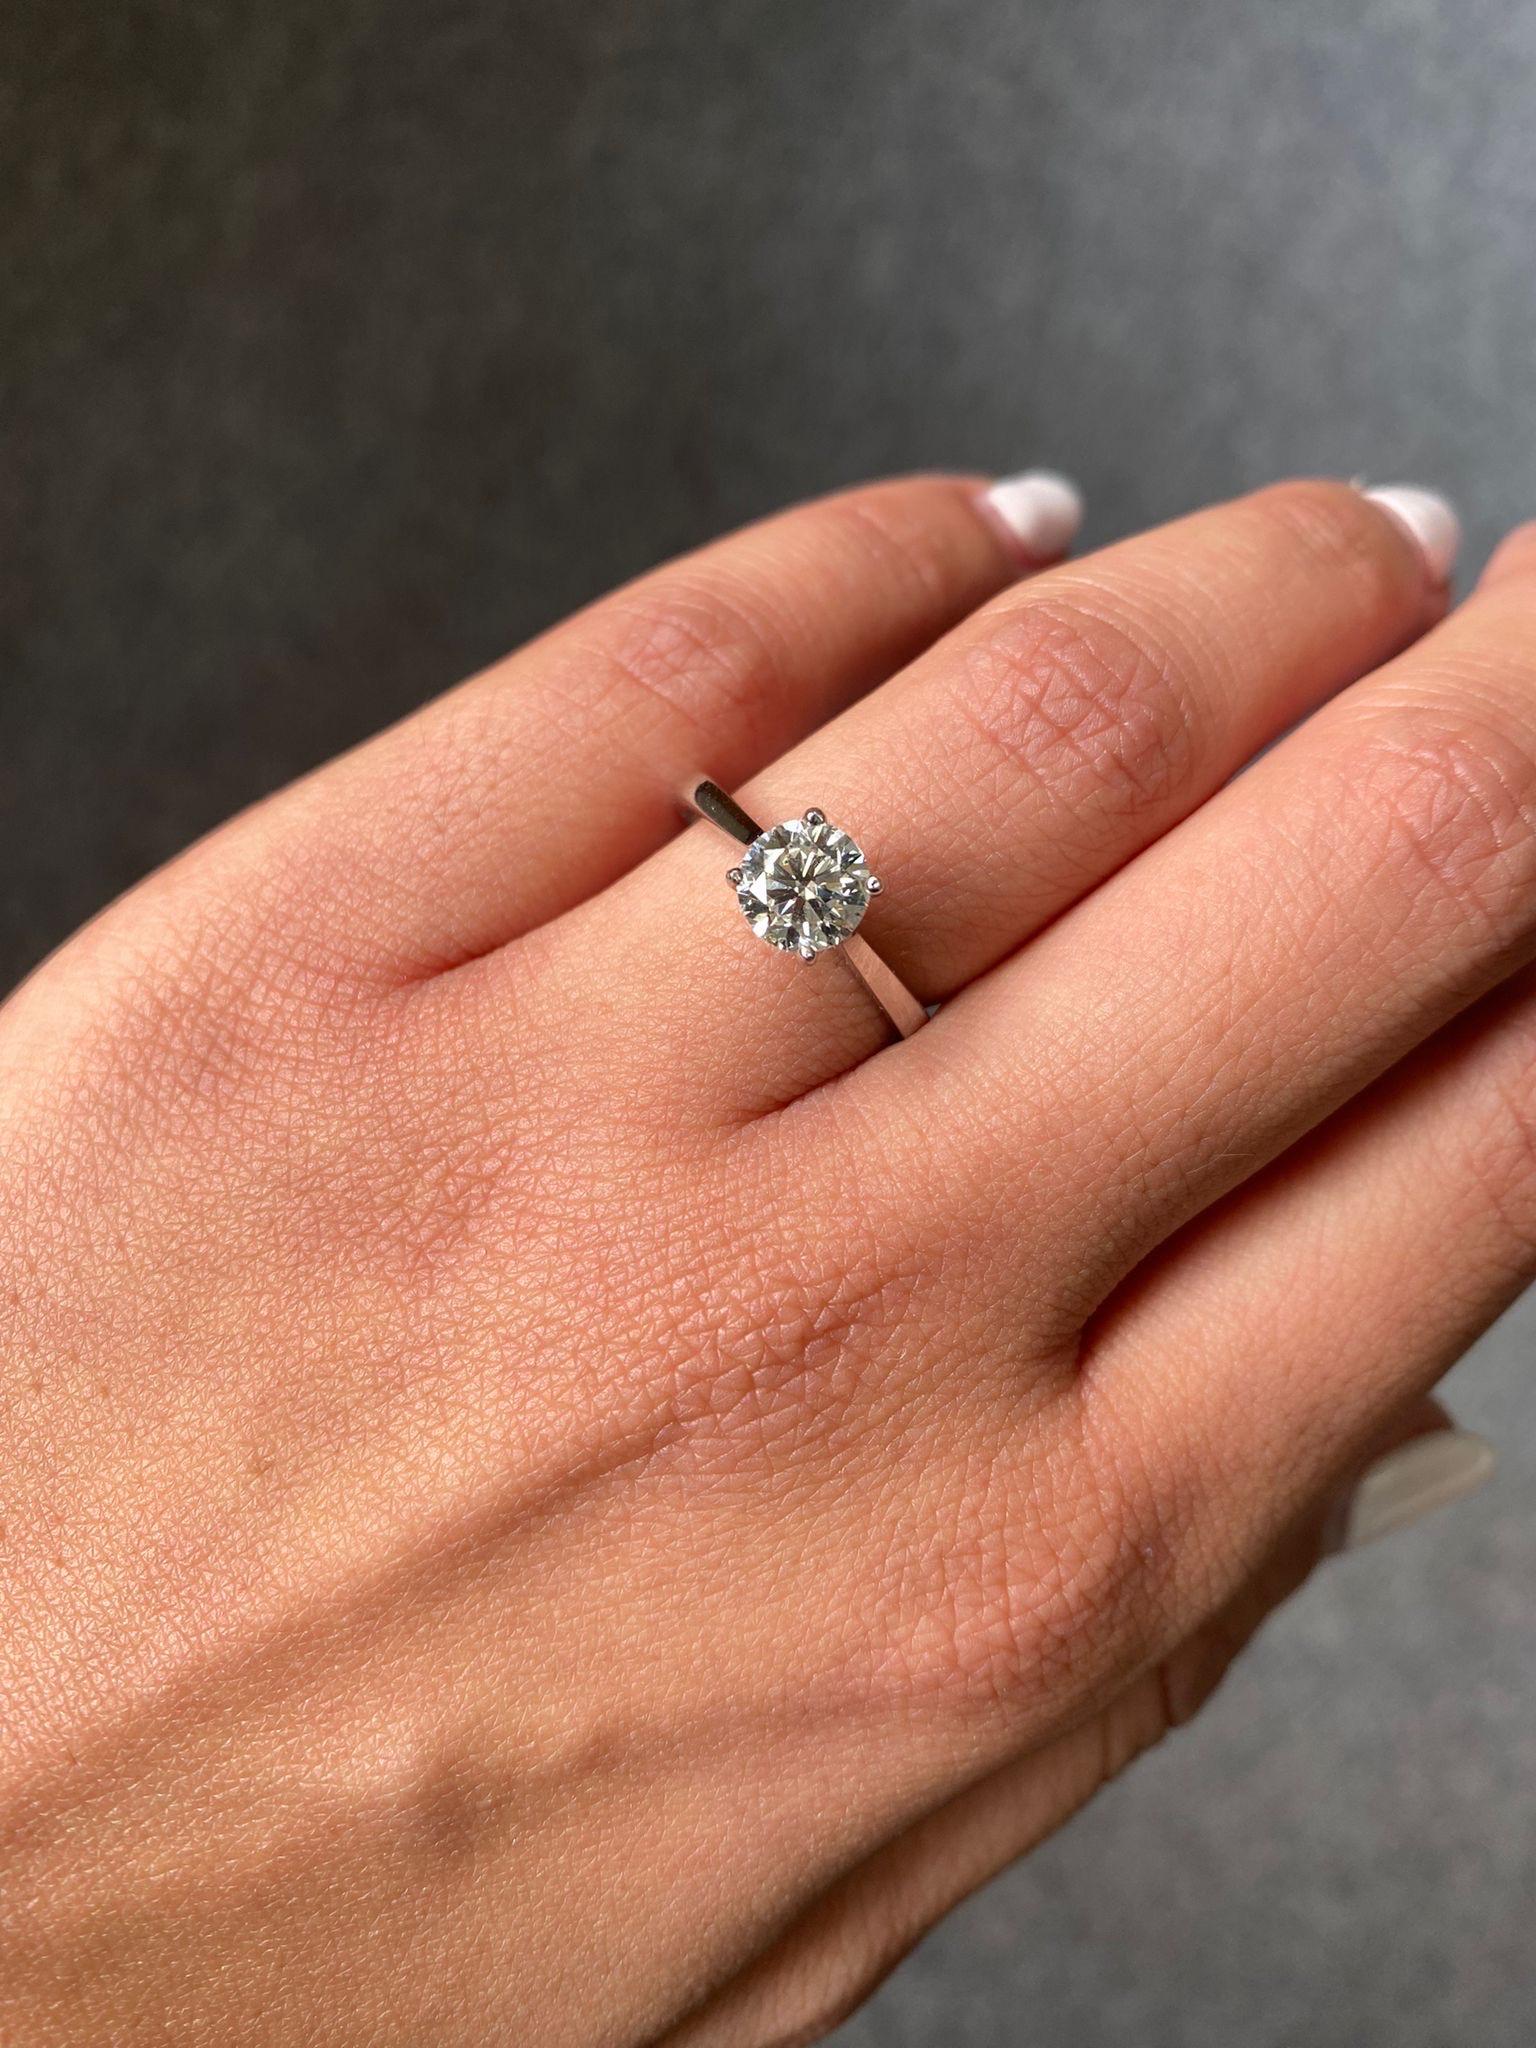 A classic, 1.01 carat VS2 quality, I color, Diamond solitaire ring - set in solid 18K White Gold. Comes with an IGI certificate. Currently sized at US6, can be resized.
We provide free shipping, and accept returns. 